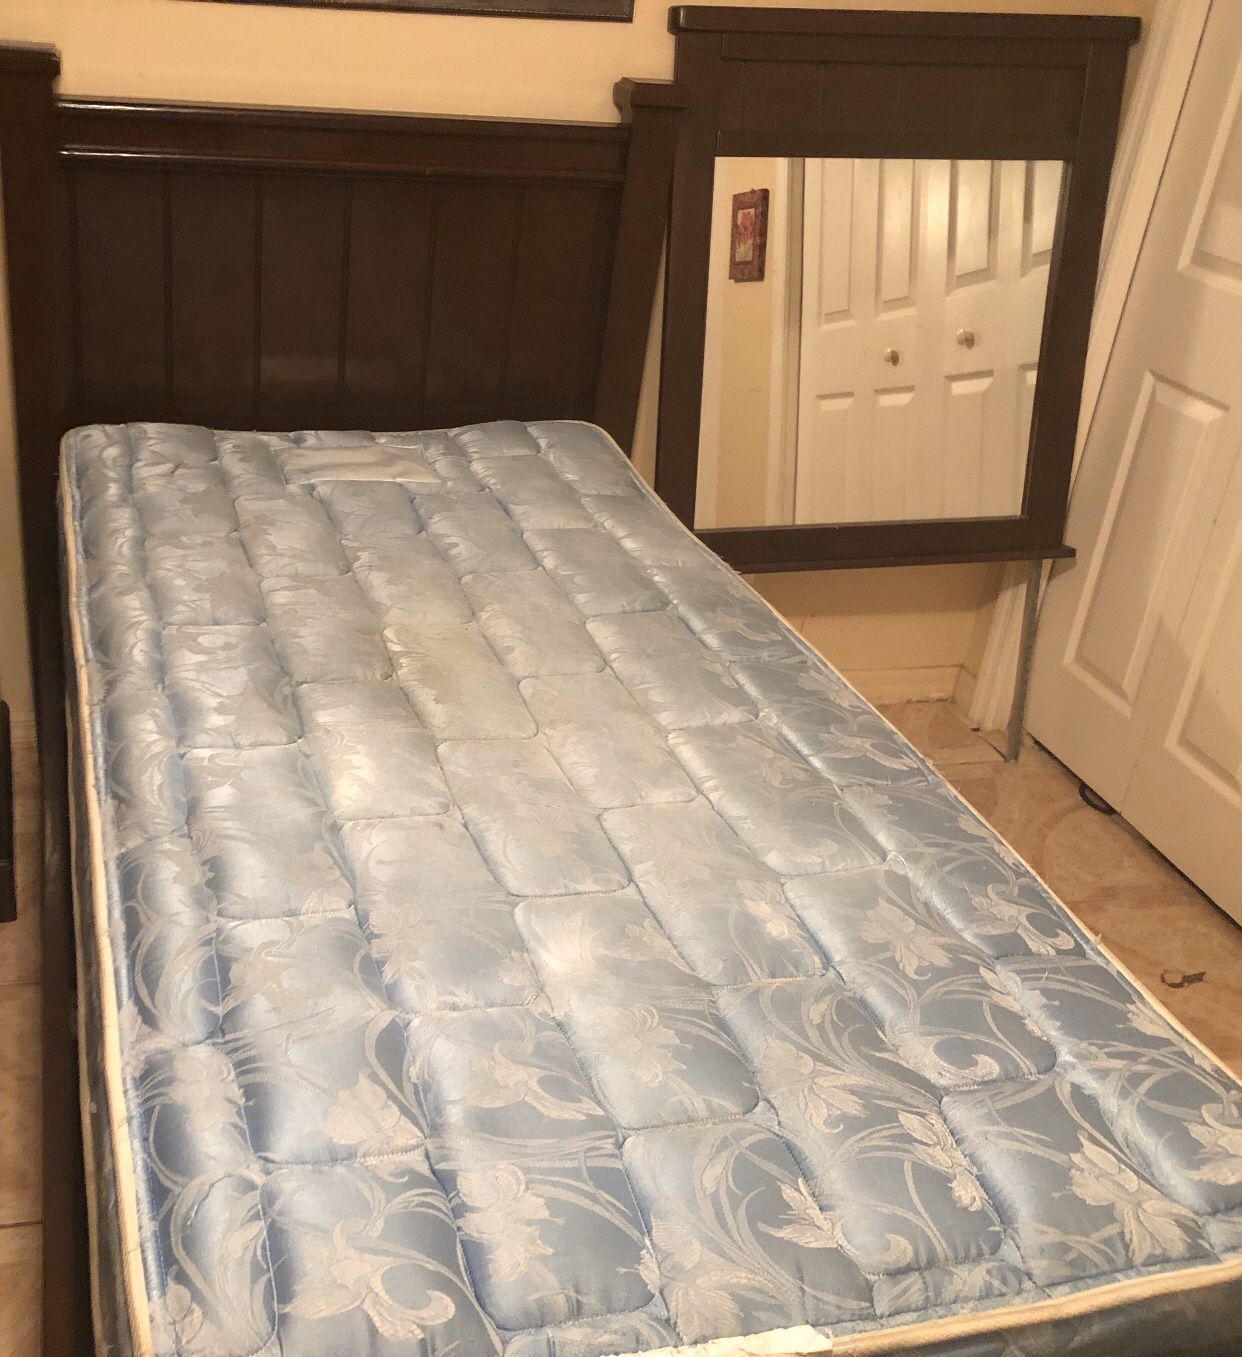 BEAUTIFUL TWIN SIZE BED INCLUDE HEADBOARD FOOTBOARD RAILS FRAME MATTRESS BOX SPRING AND A MIIROR All EXCELLENT CONDITION